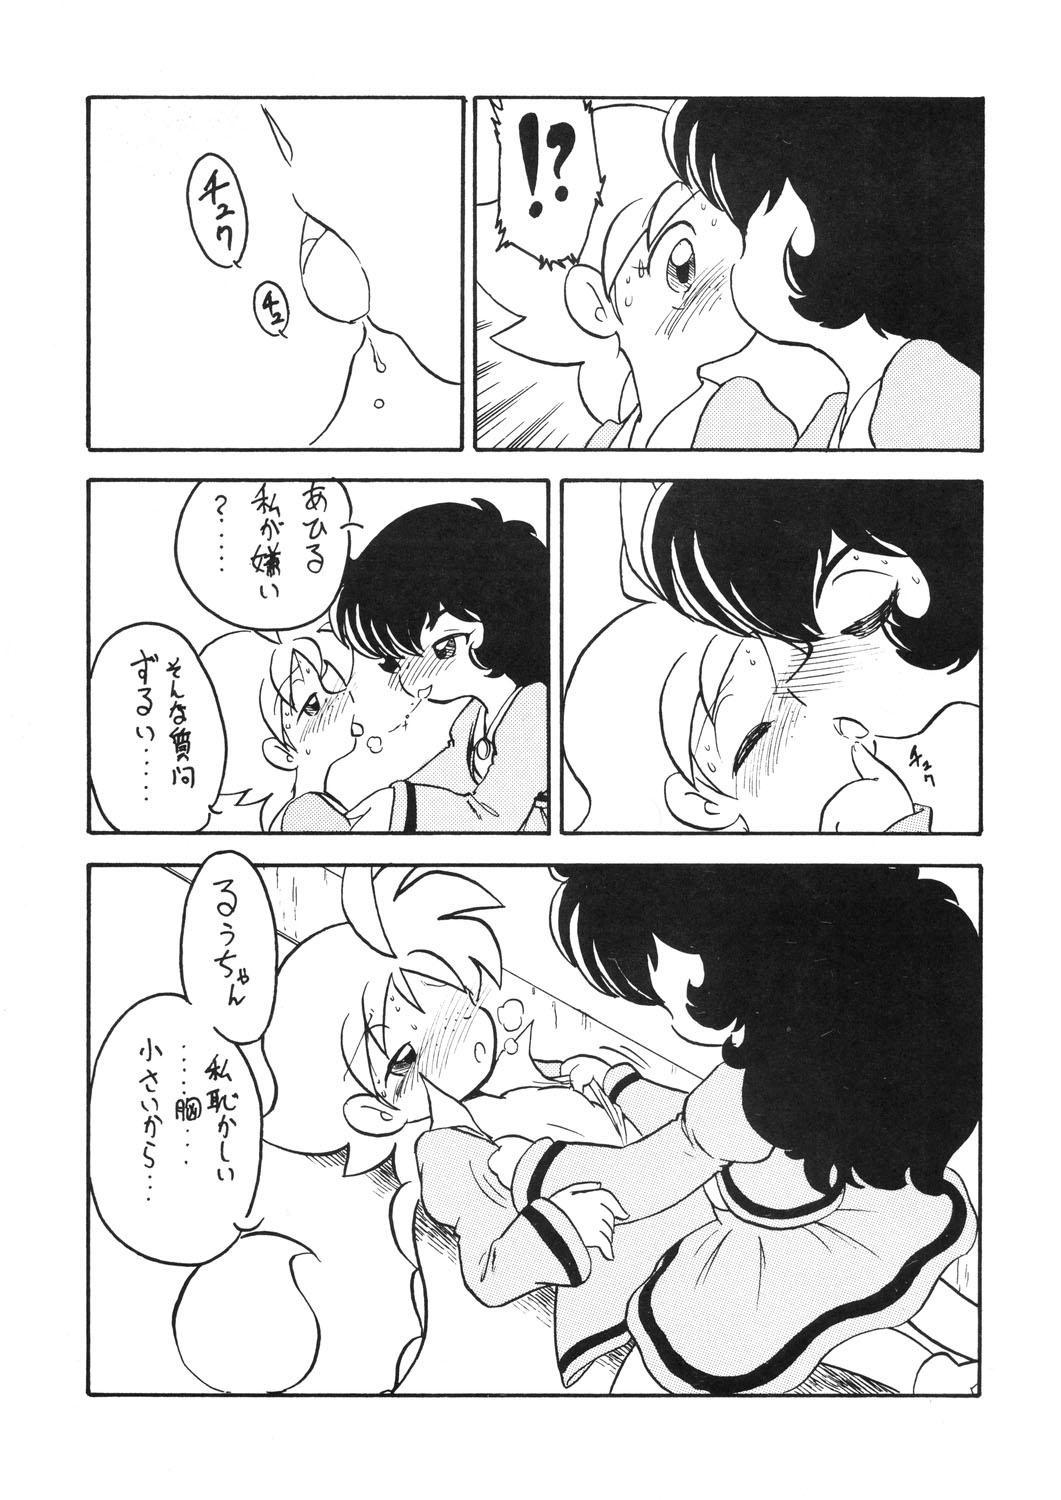 Transex Duck's Egg - Princess tutu Assfucked - Page 8